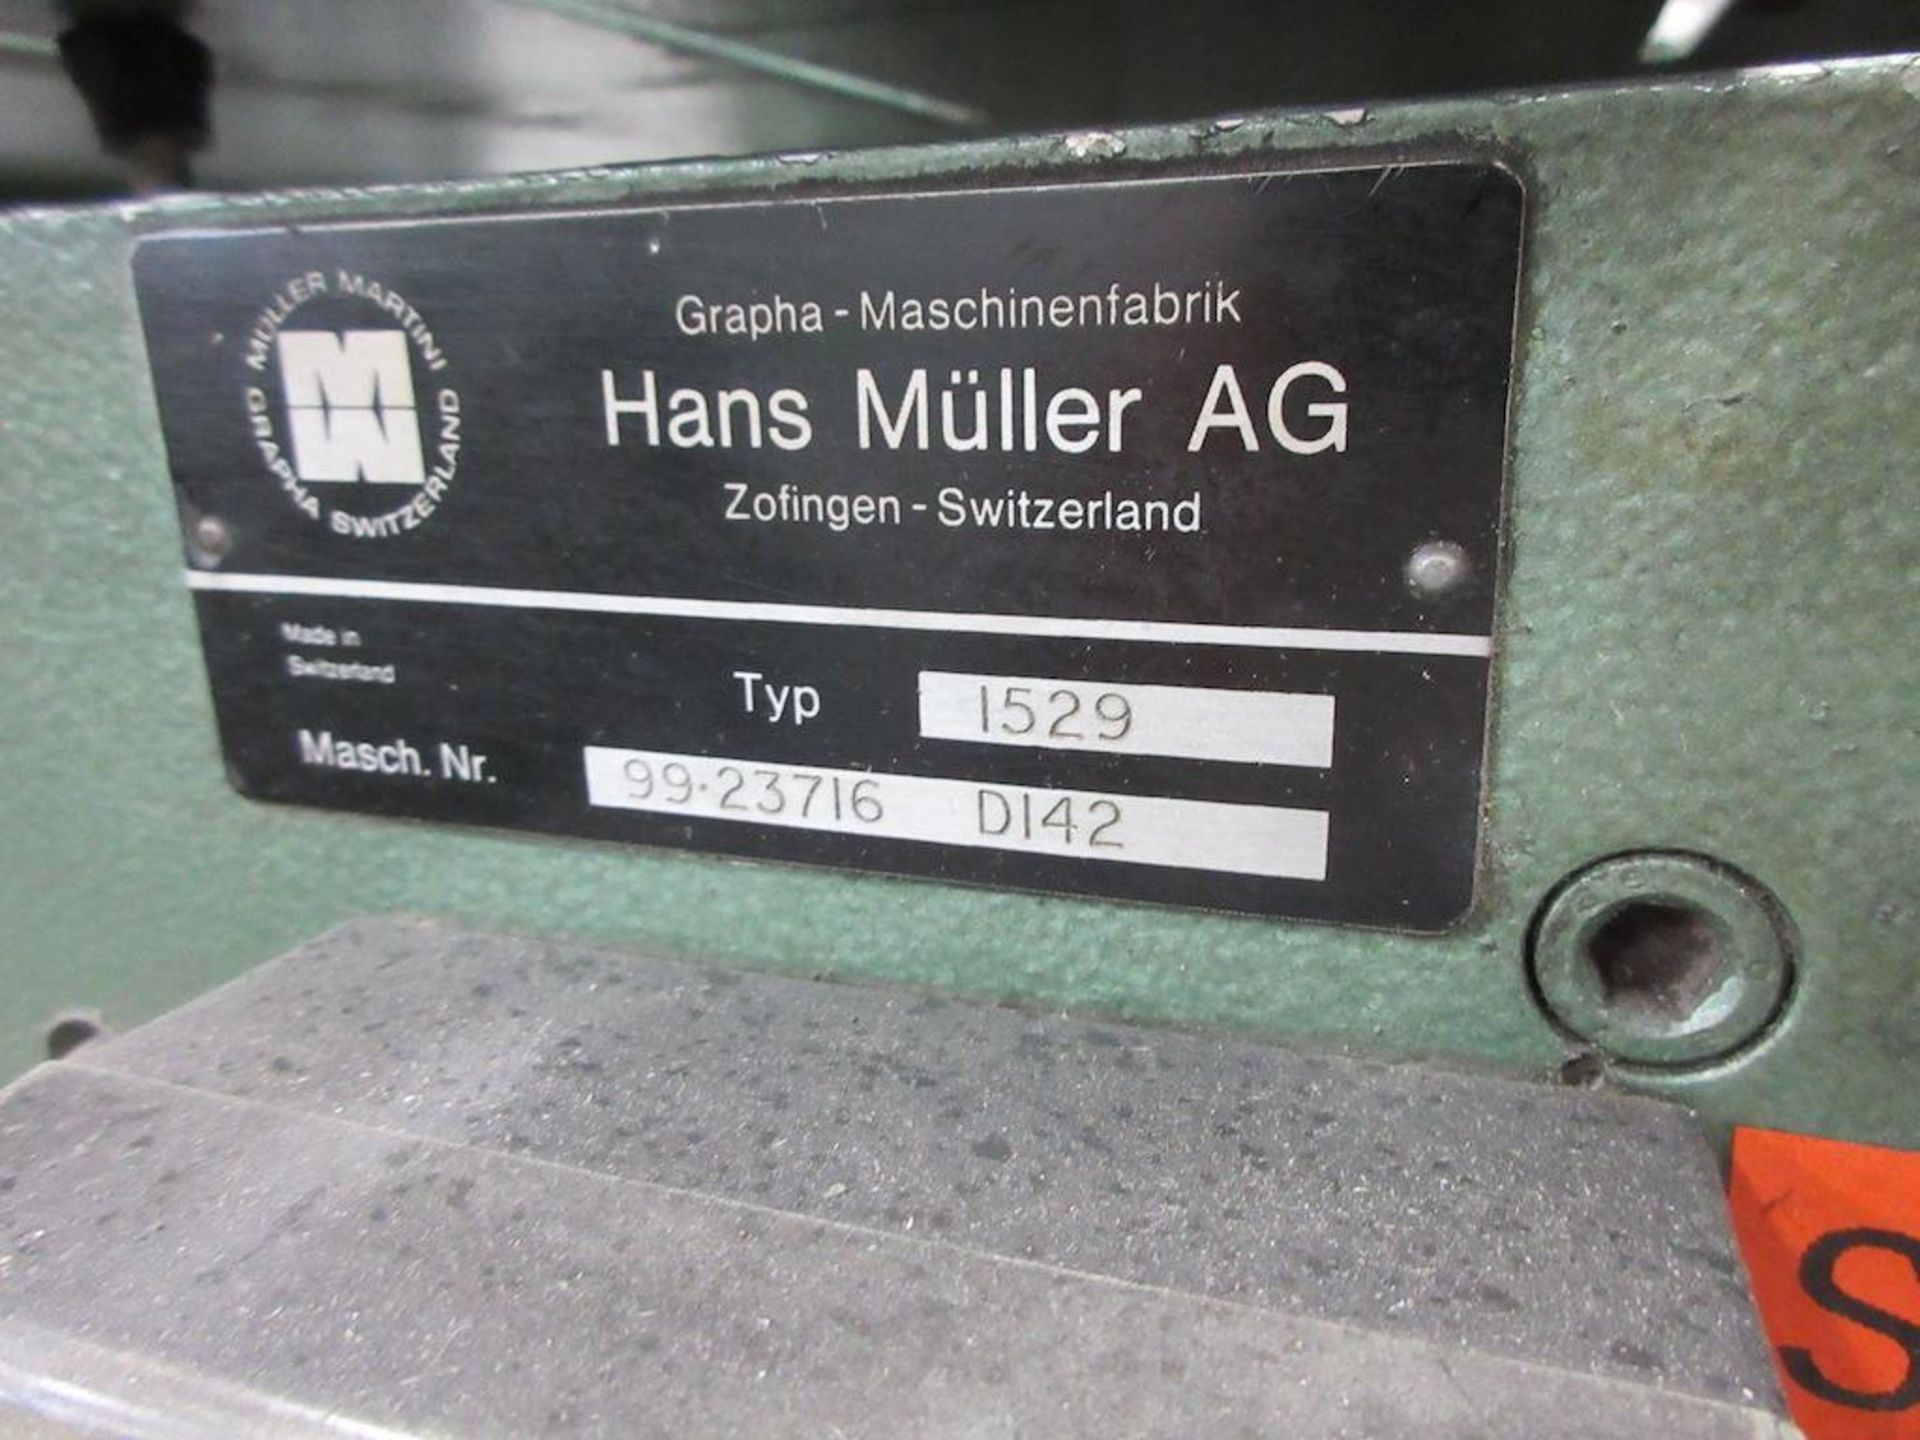 Muller 335 (6 Stations + Cover Feeder) includes Muller Stacker Muller 6 Stations: Type 306, sn 99.31 - Image 11 of 30